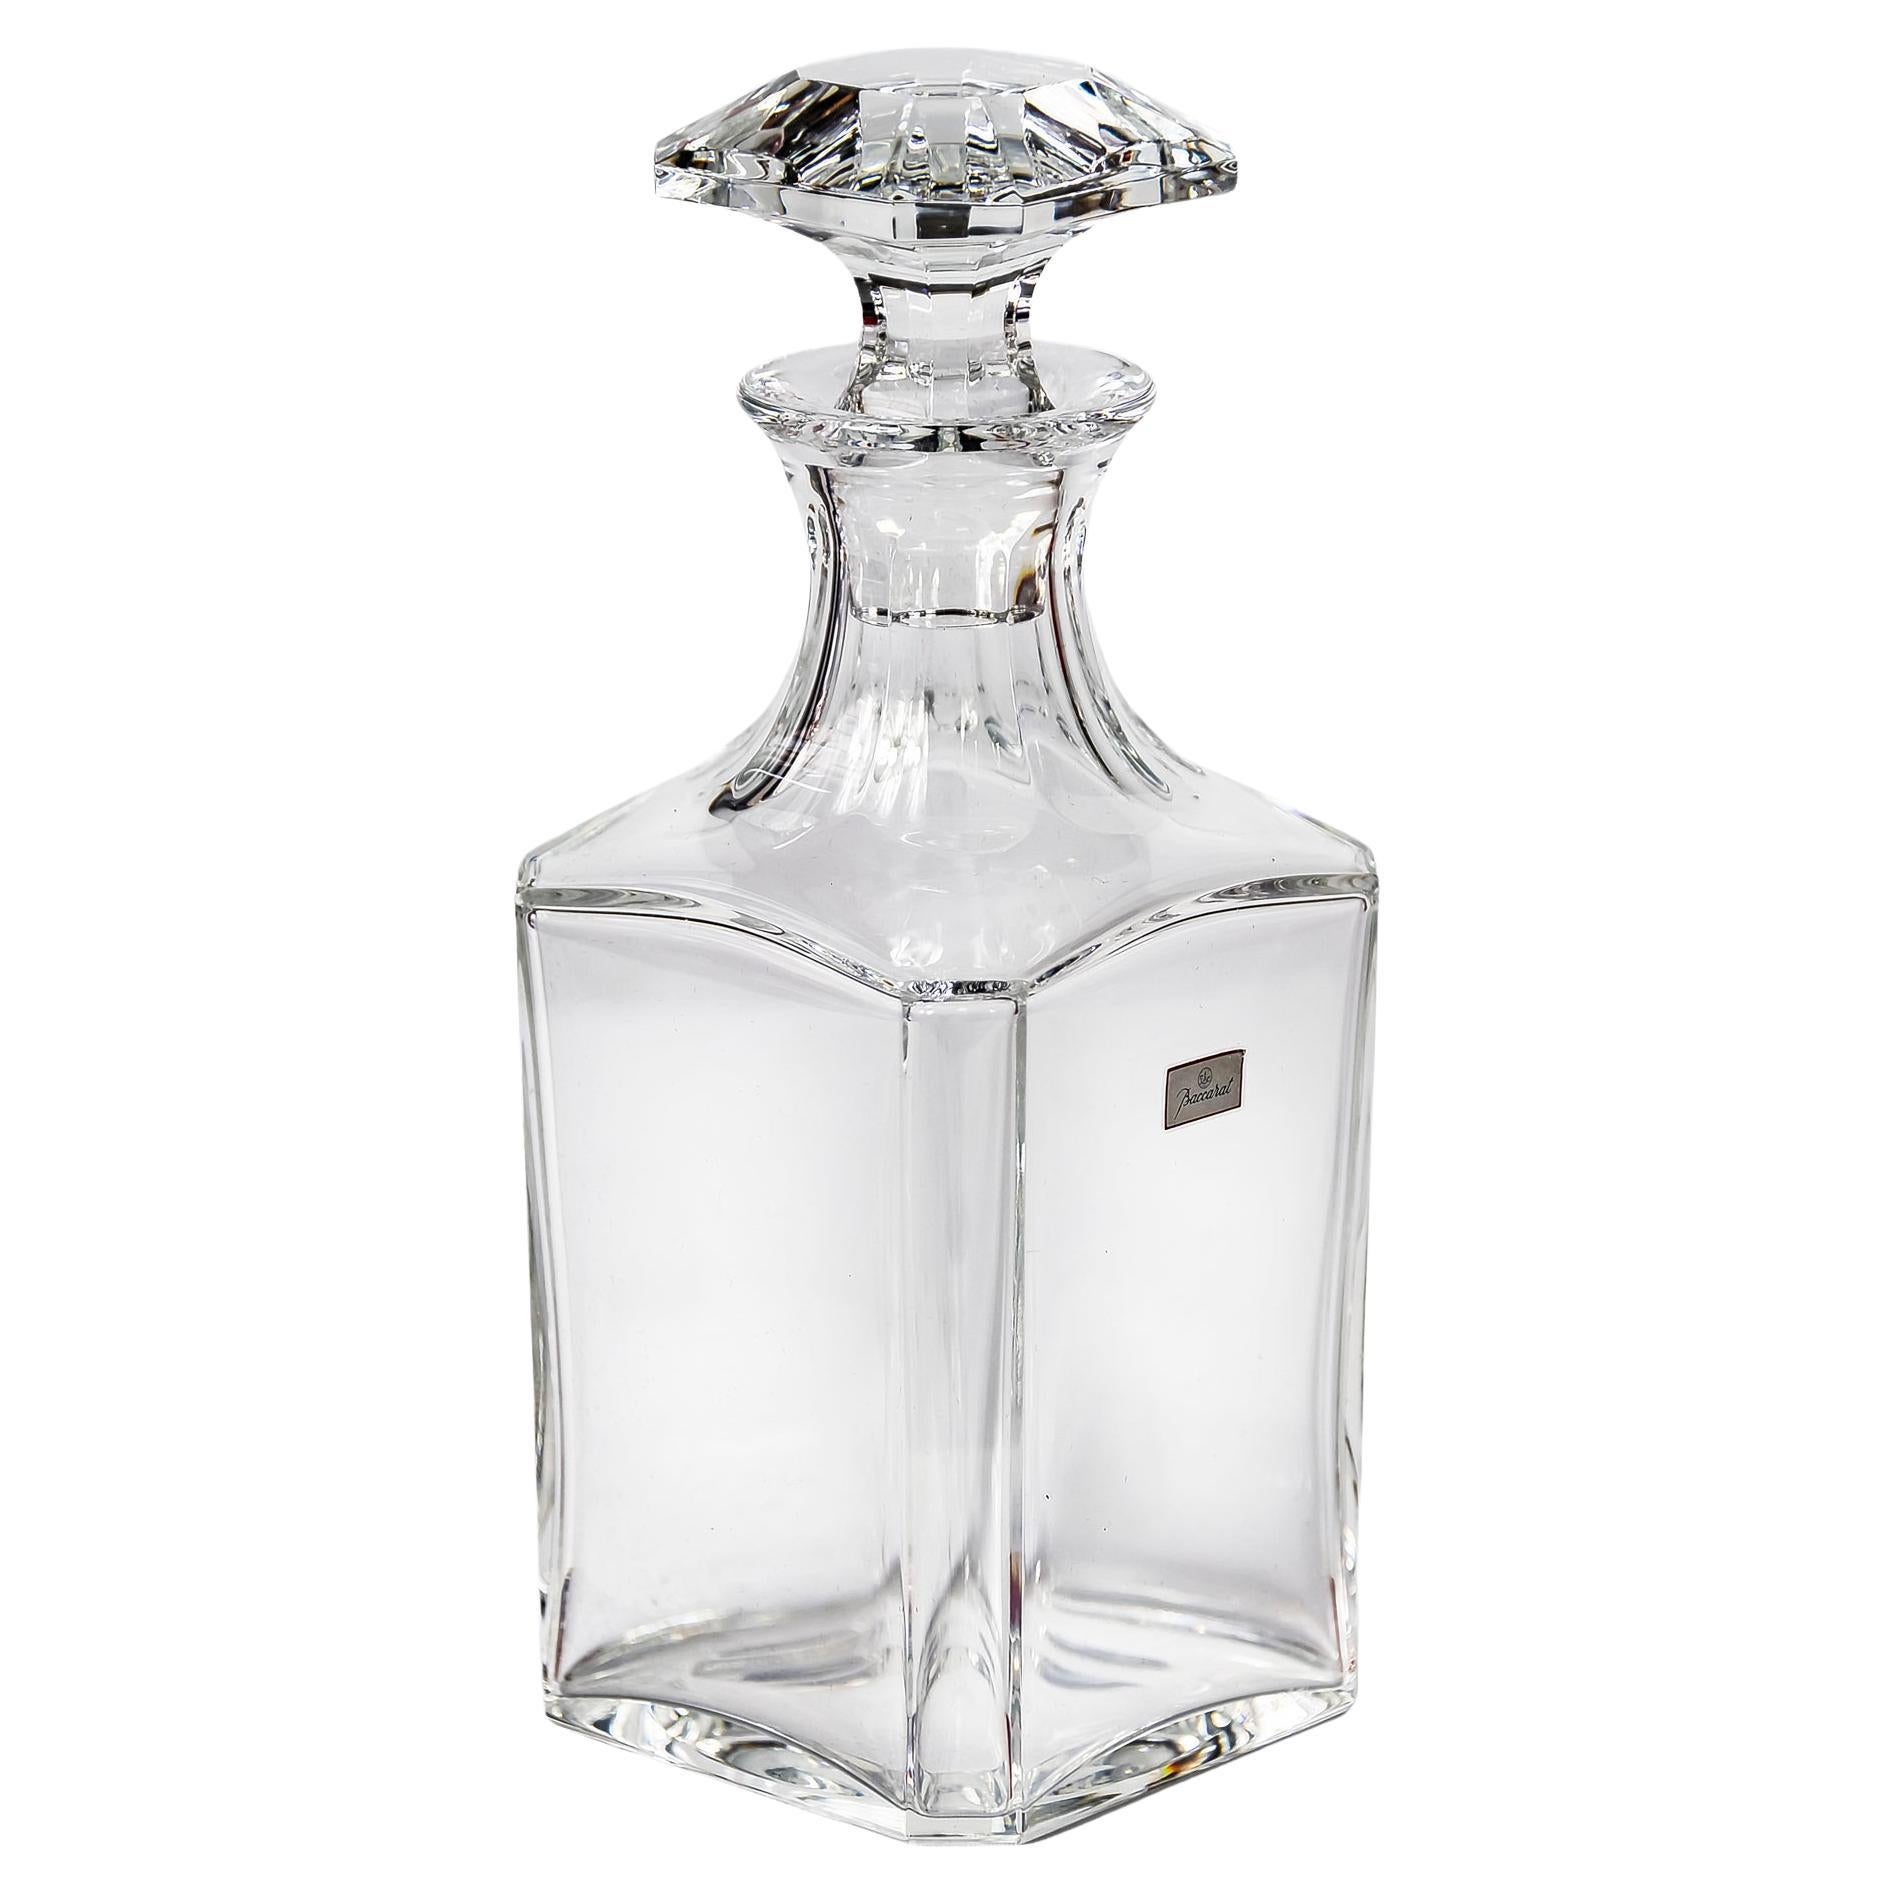 French Baccarat crystal Perfection square whiskey decanter.
Marked on the bottom and stopper.
Engraved on the side.
Original box.
Excellent condition.